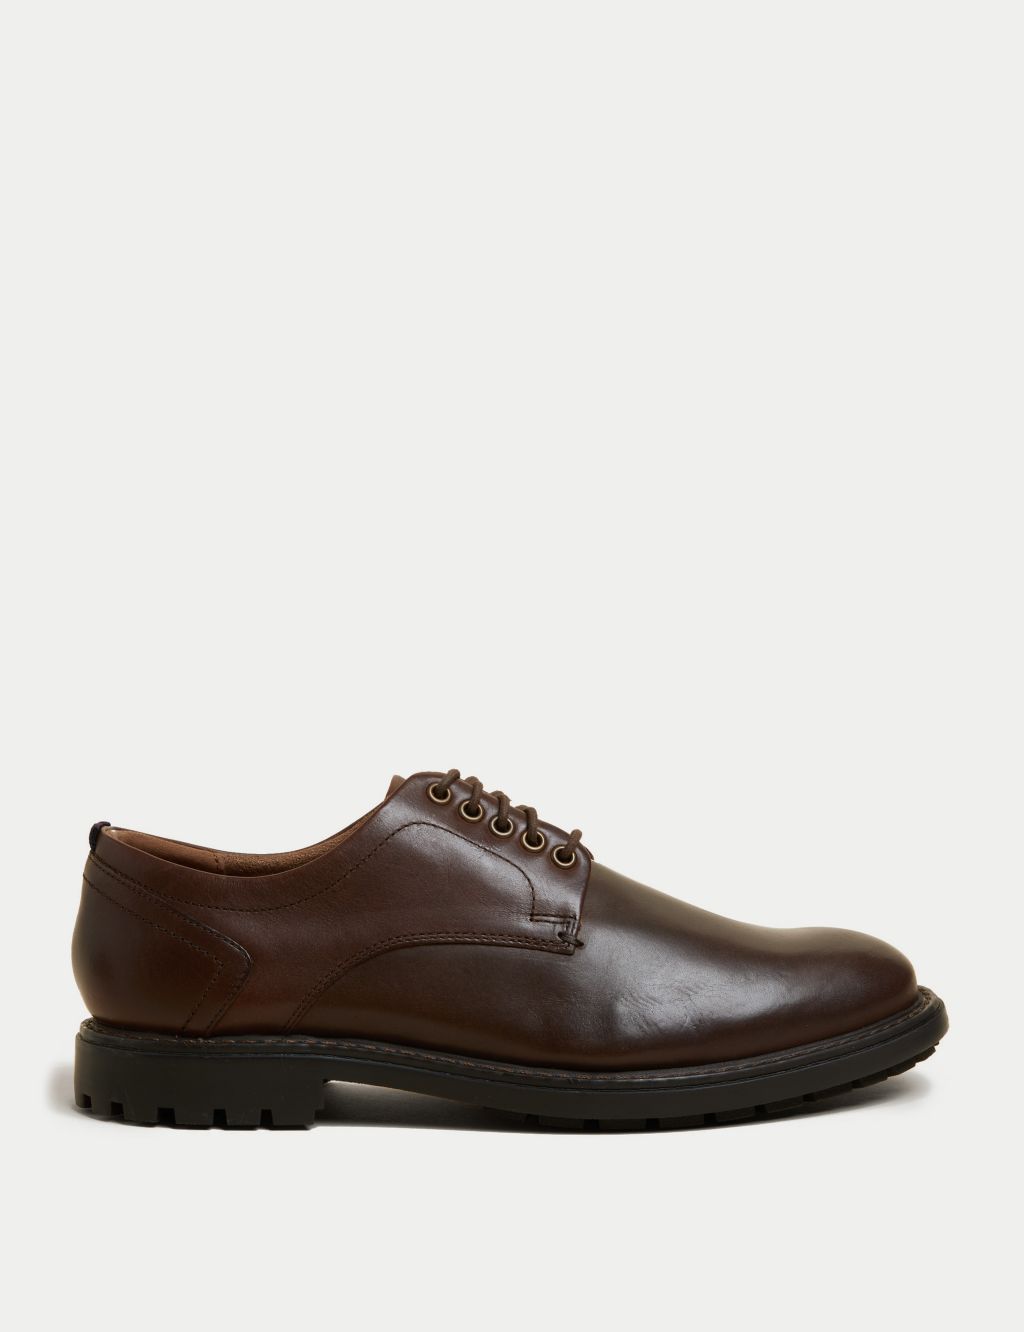 Wide Fit Heritage Leather Derby Shoes image 1